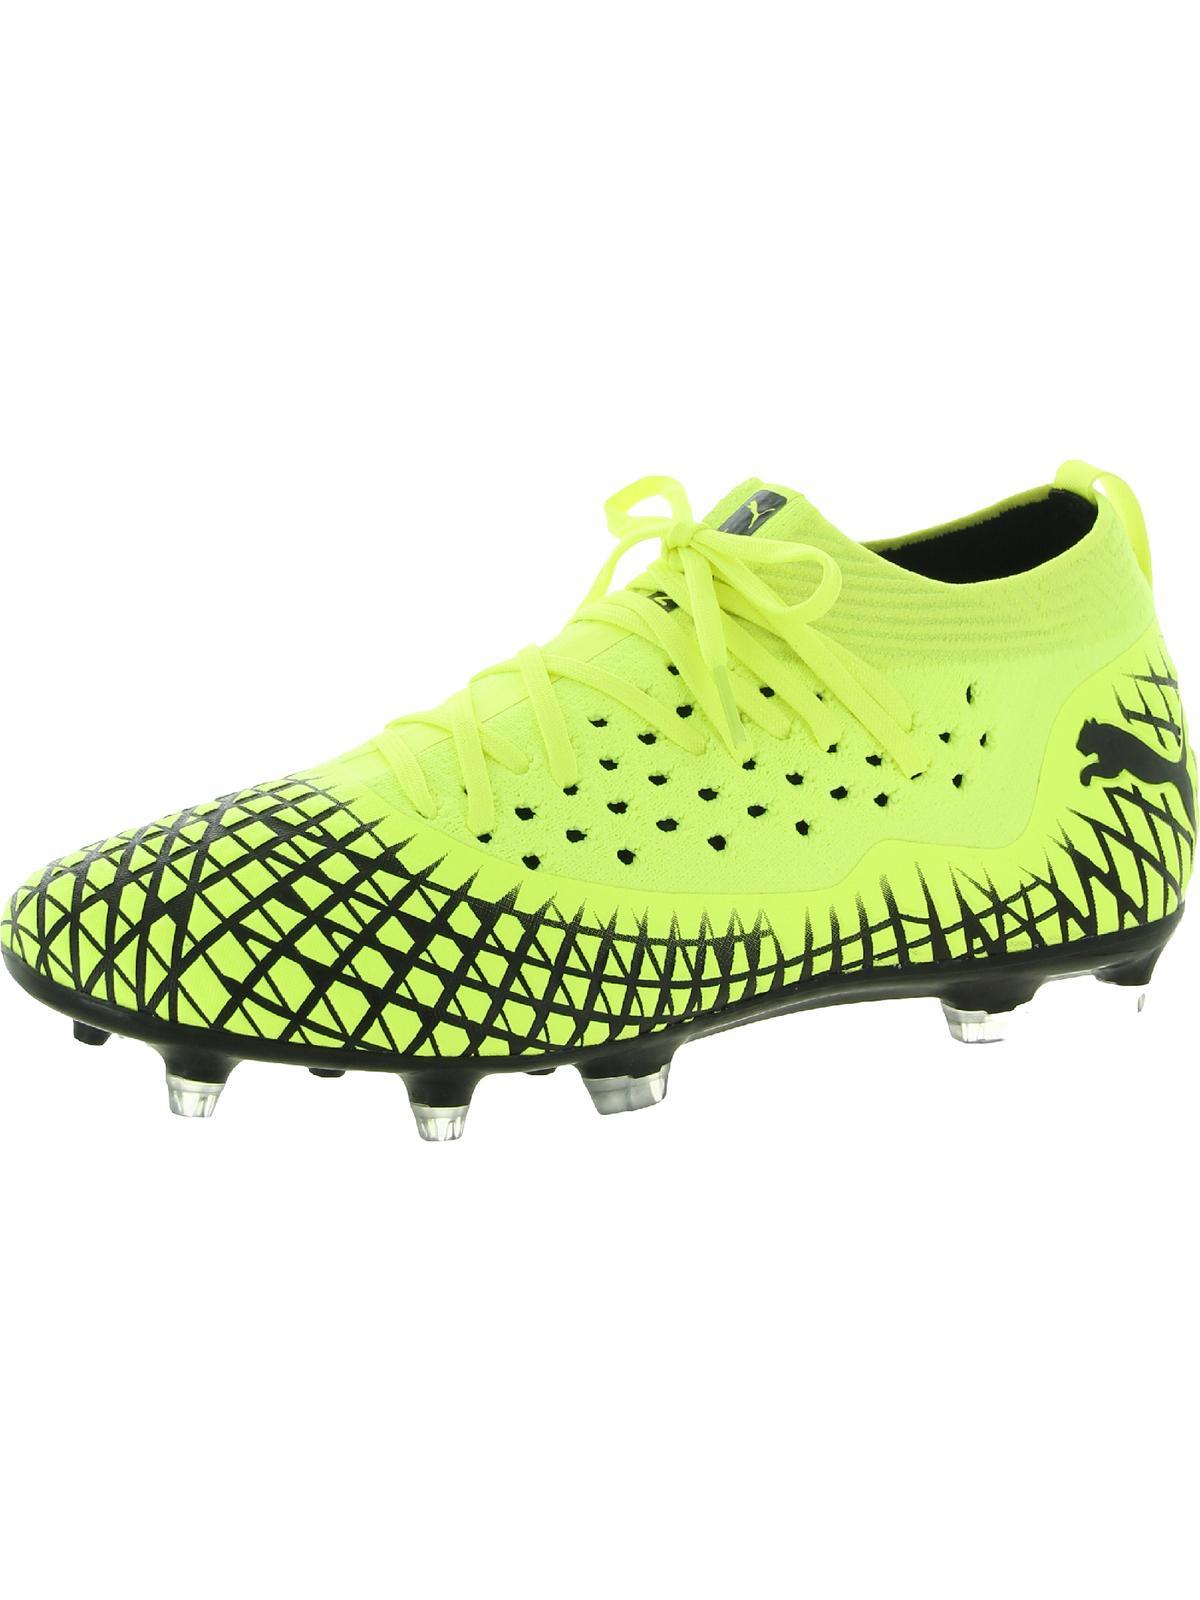 PUMA Future 4.2 Netfit Fg/ag Football Boots Lace Ankle Boots in Green | Lyst